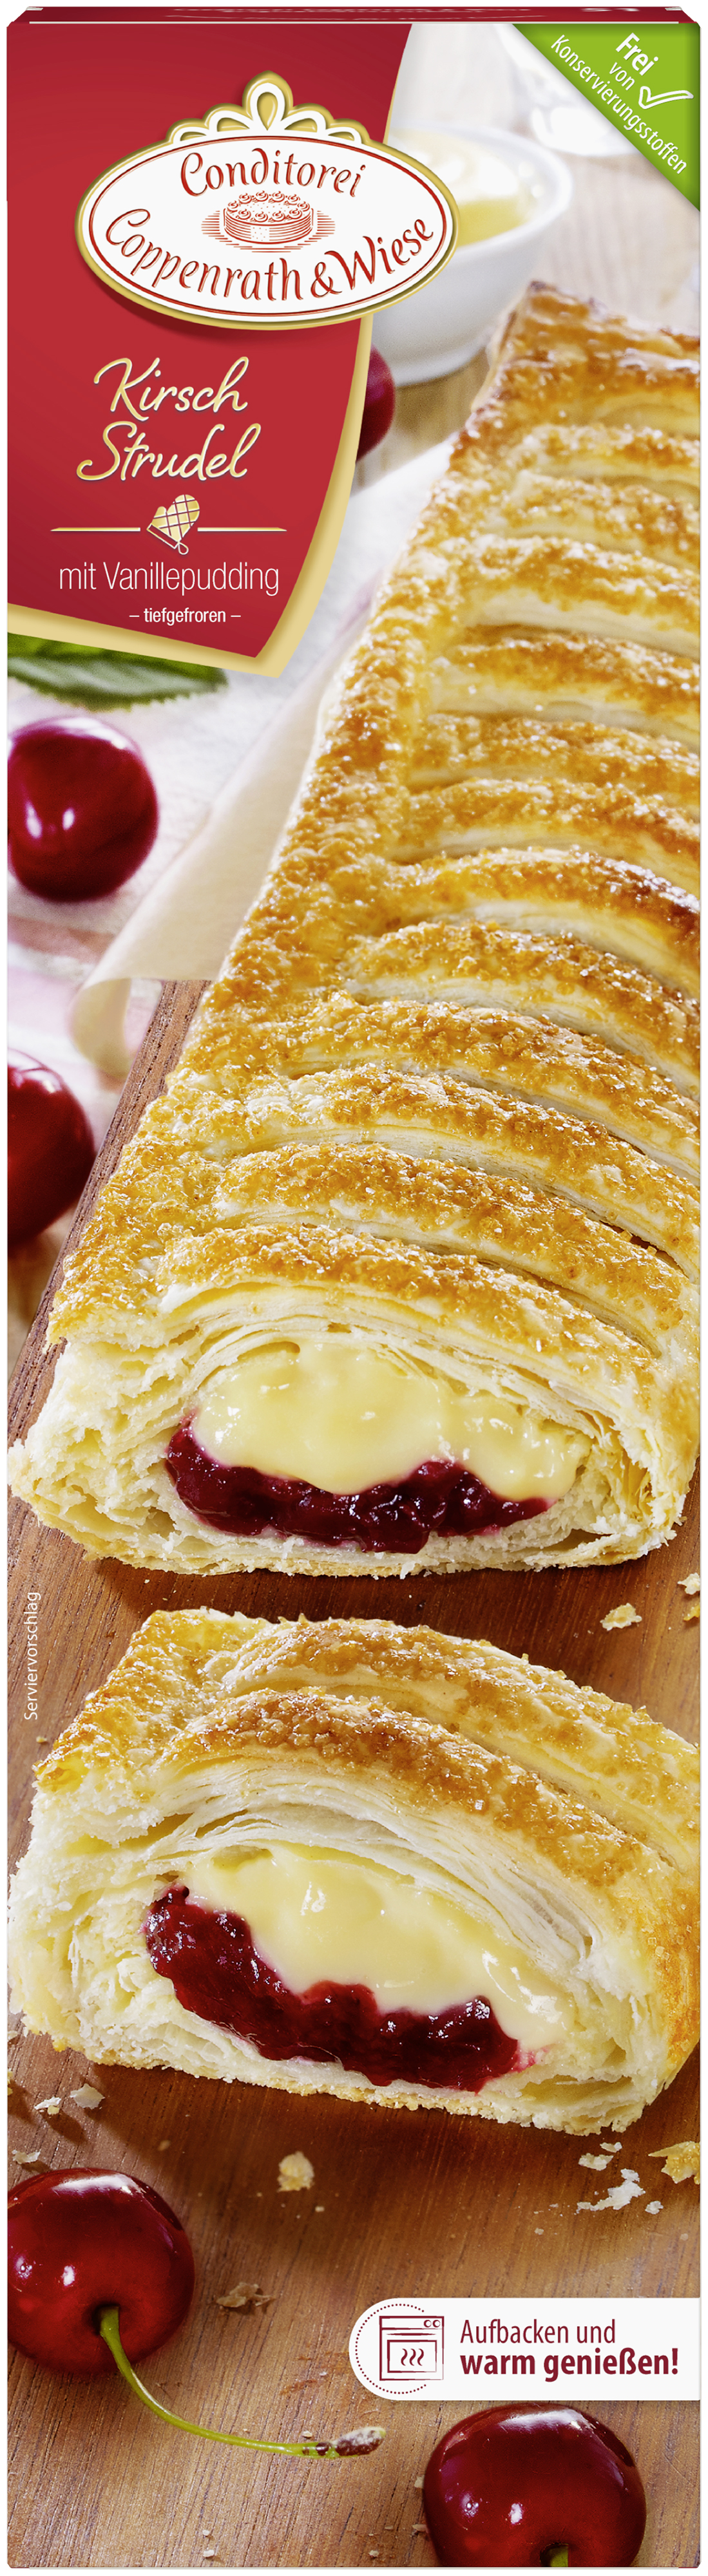 Kirsch-Strudel mit Vanillepudding (600 Bakery Bread / mynetfair / Food Tobacco Products Sweet / Bakery · Products KG Wiese Conditorei & grams) Coppenrath Beverage